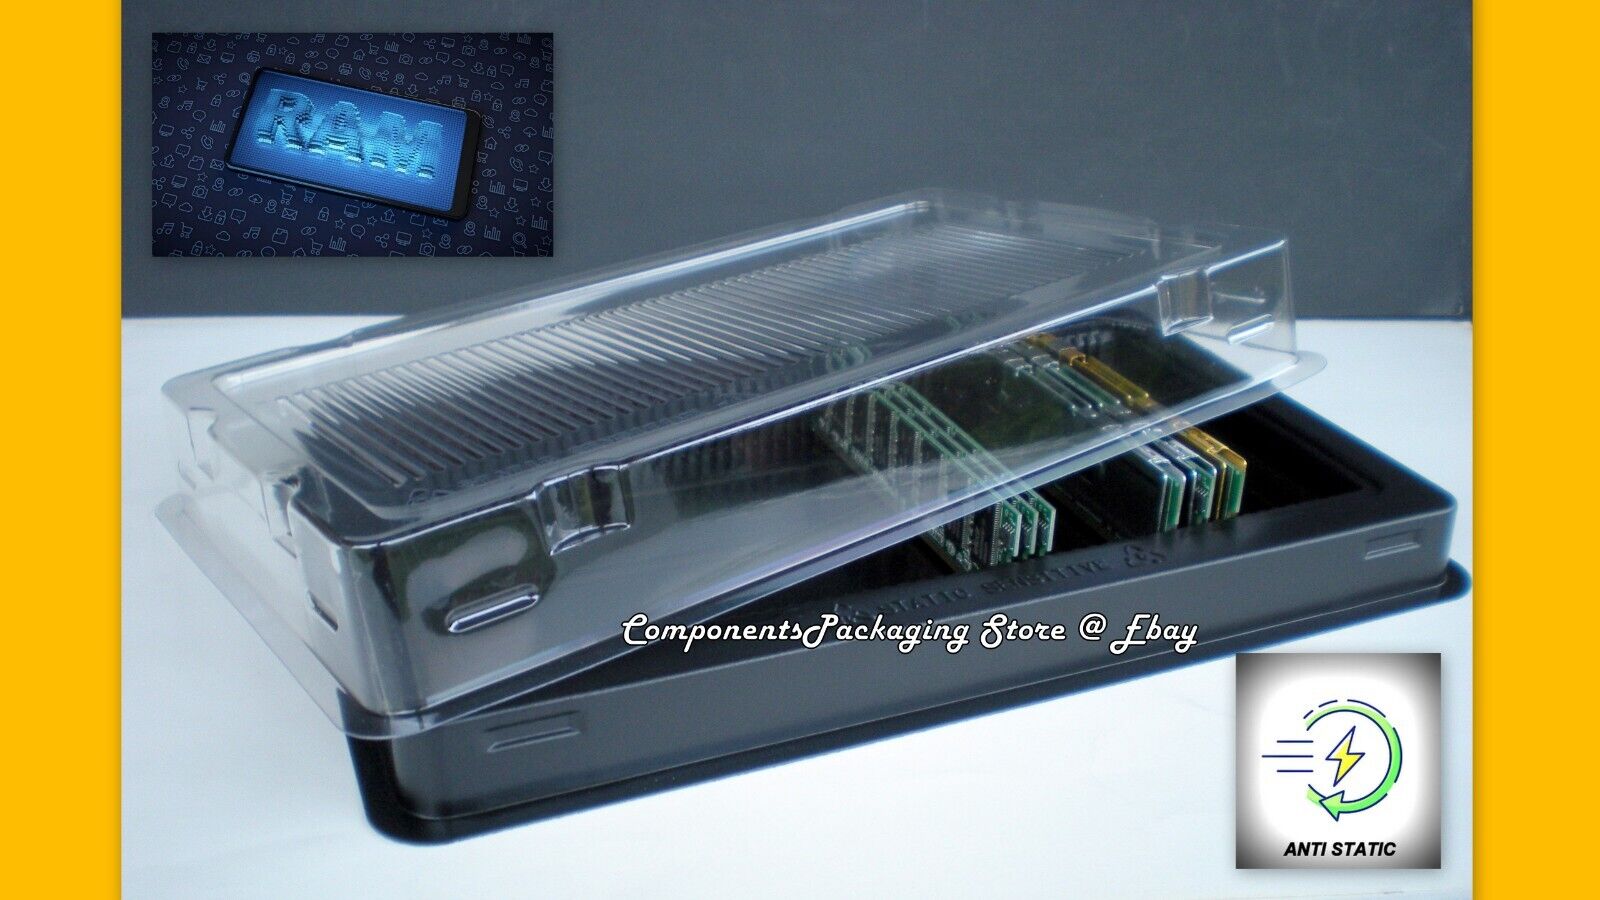 5 - PC DDR RAM Memory 50 Count Per Tray for Packaging Shipping DIMMs - Fits 250